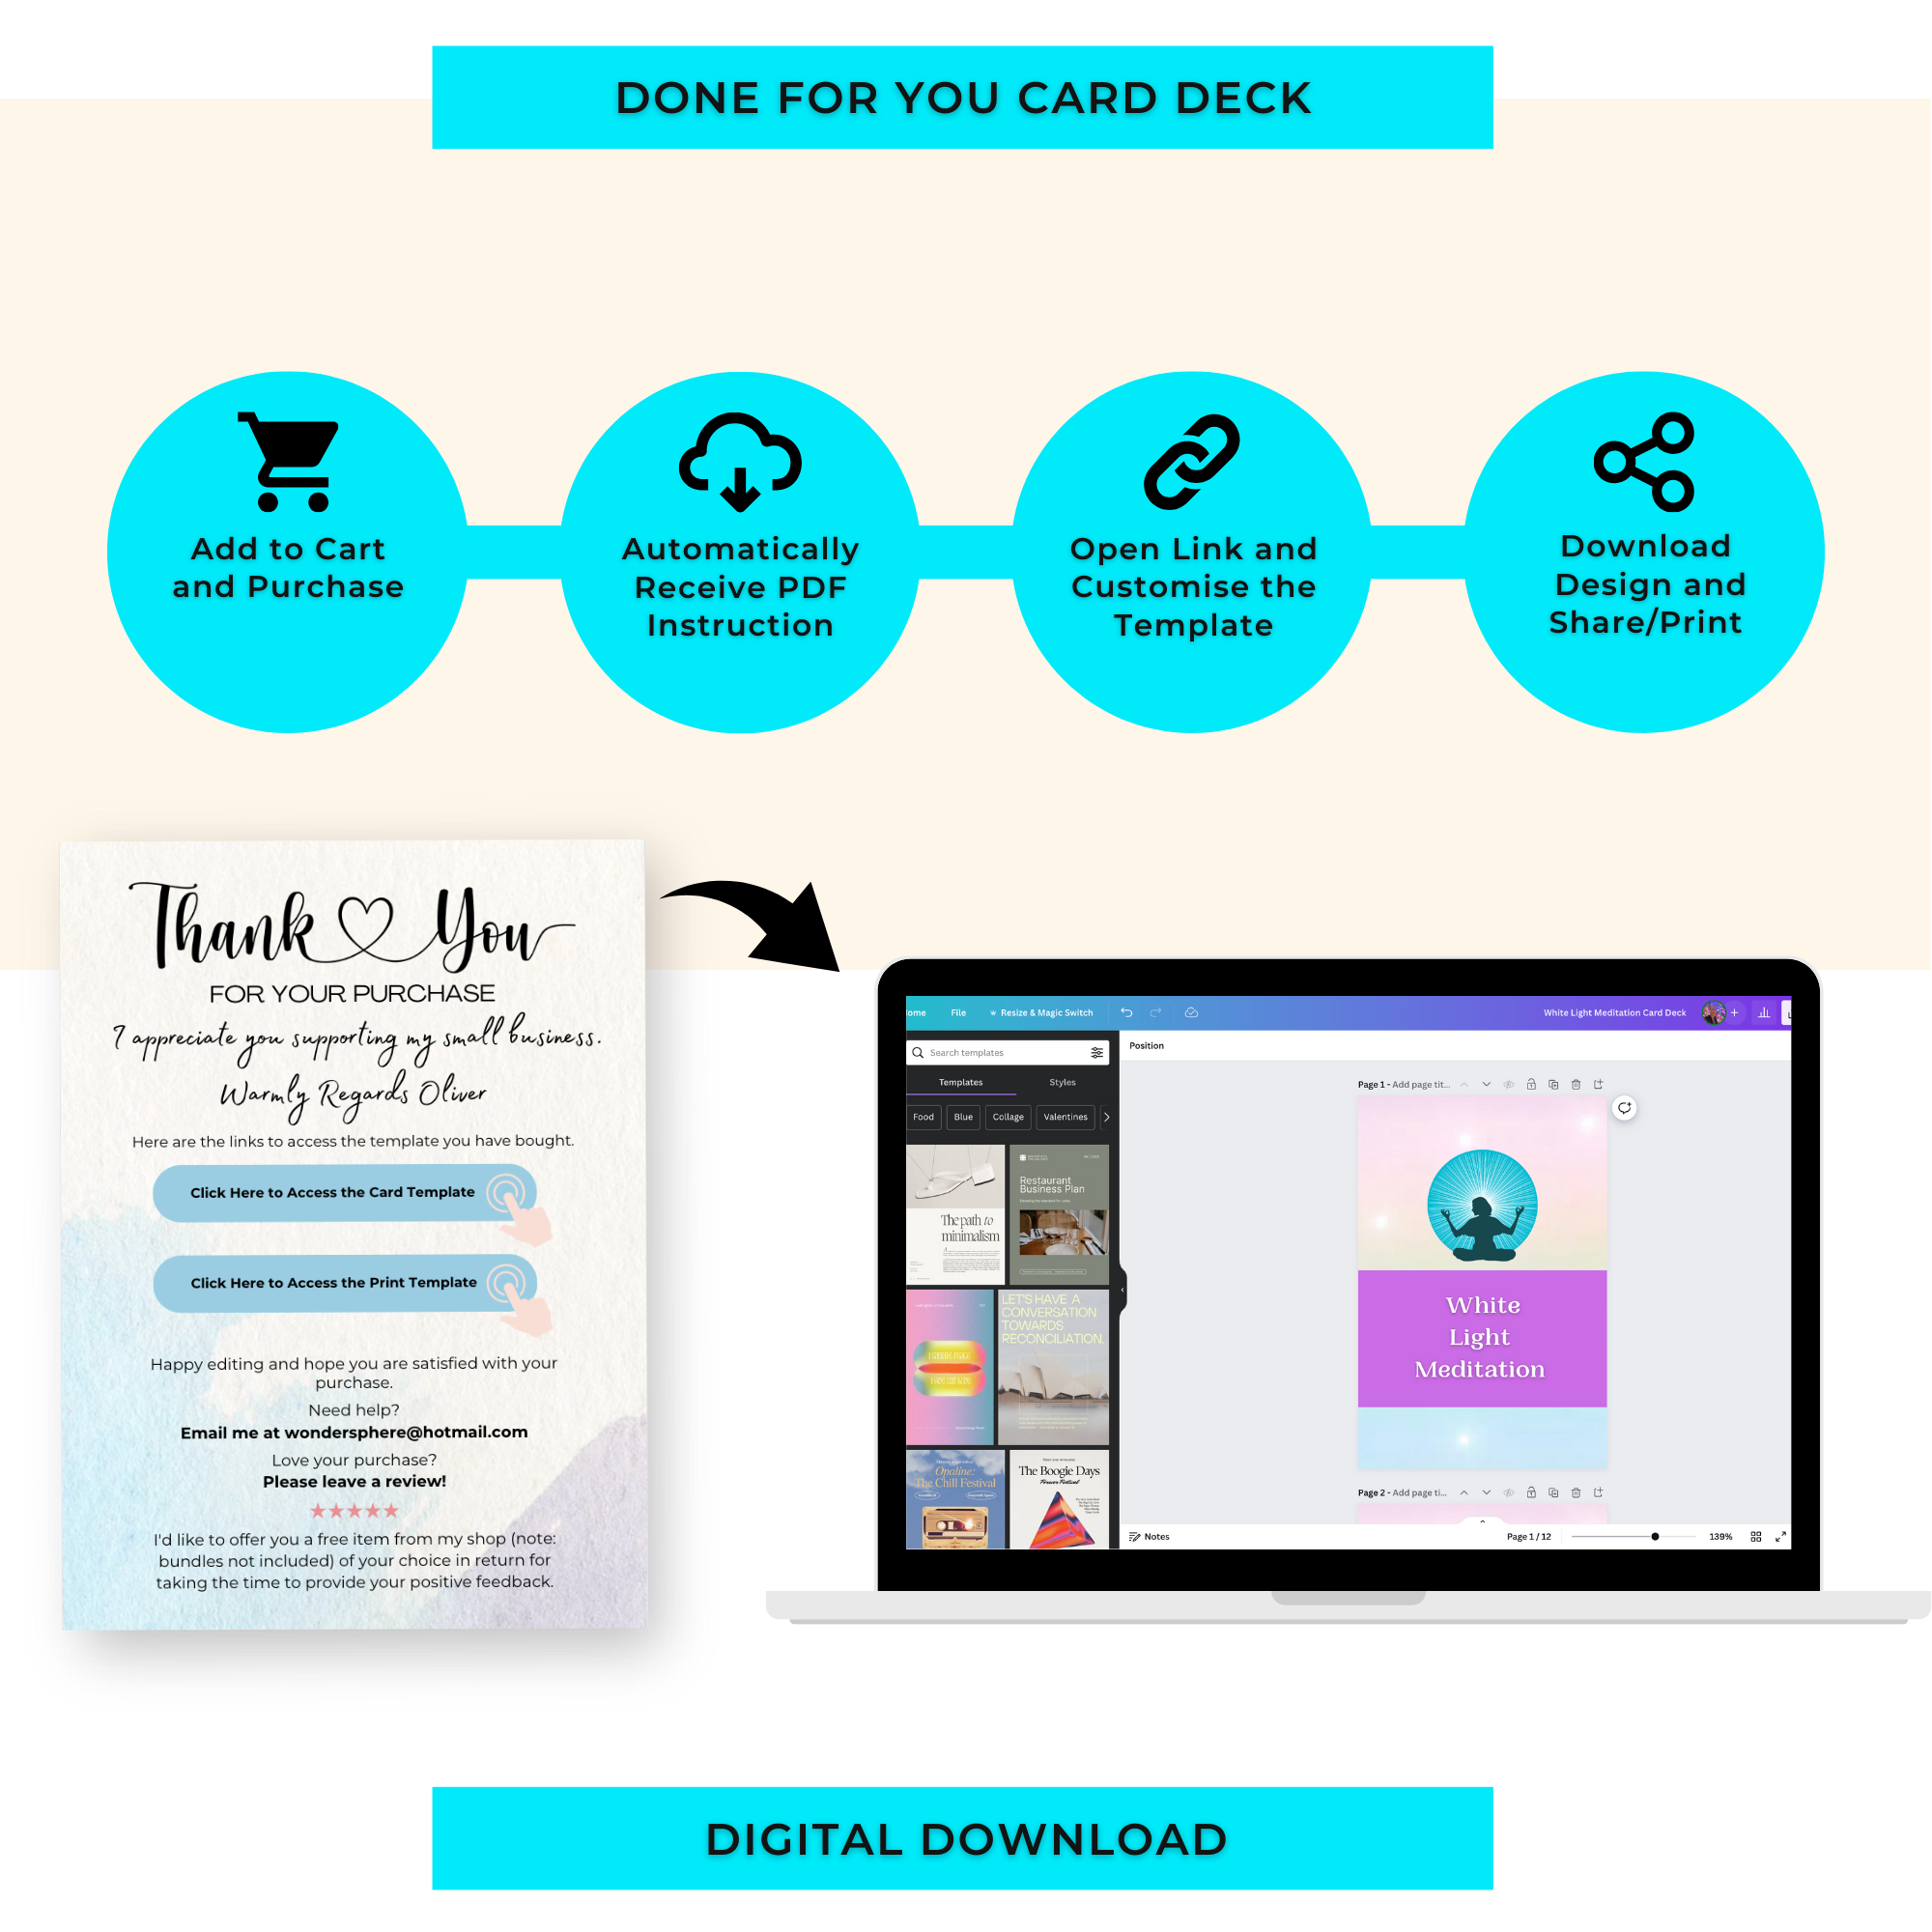 White Light Meditation Prompts | Editable 12 Card Deck in Canva | Commercial Use